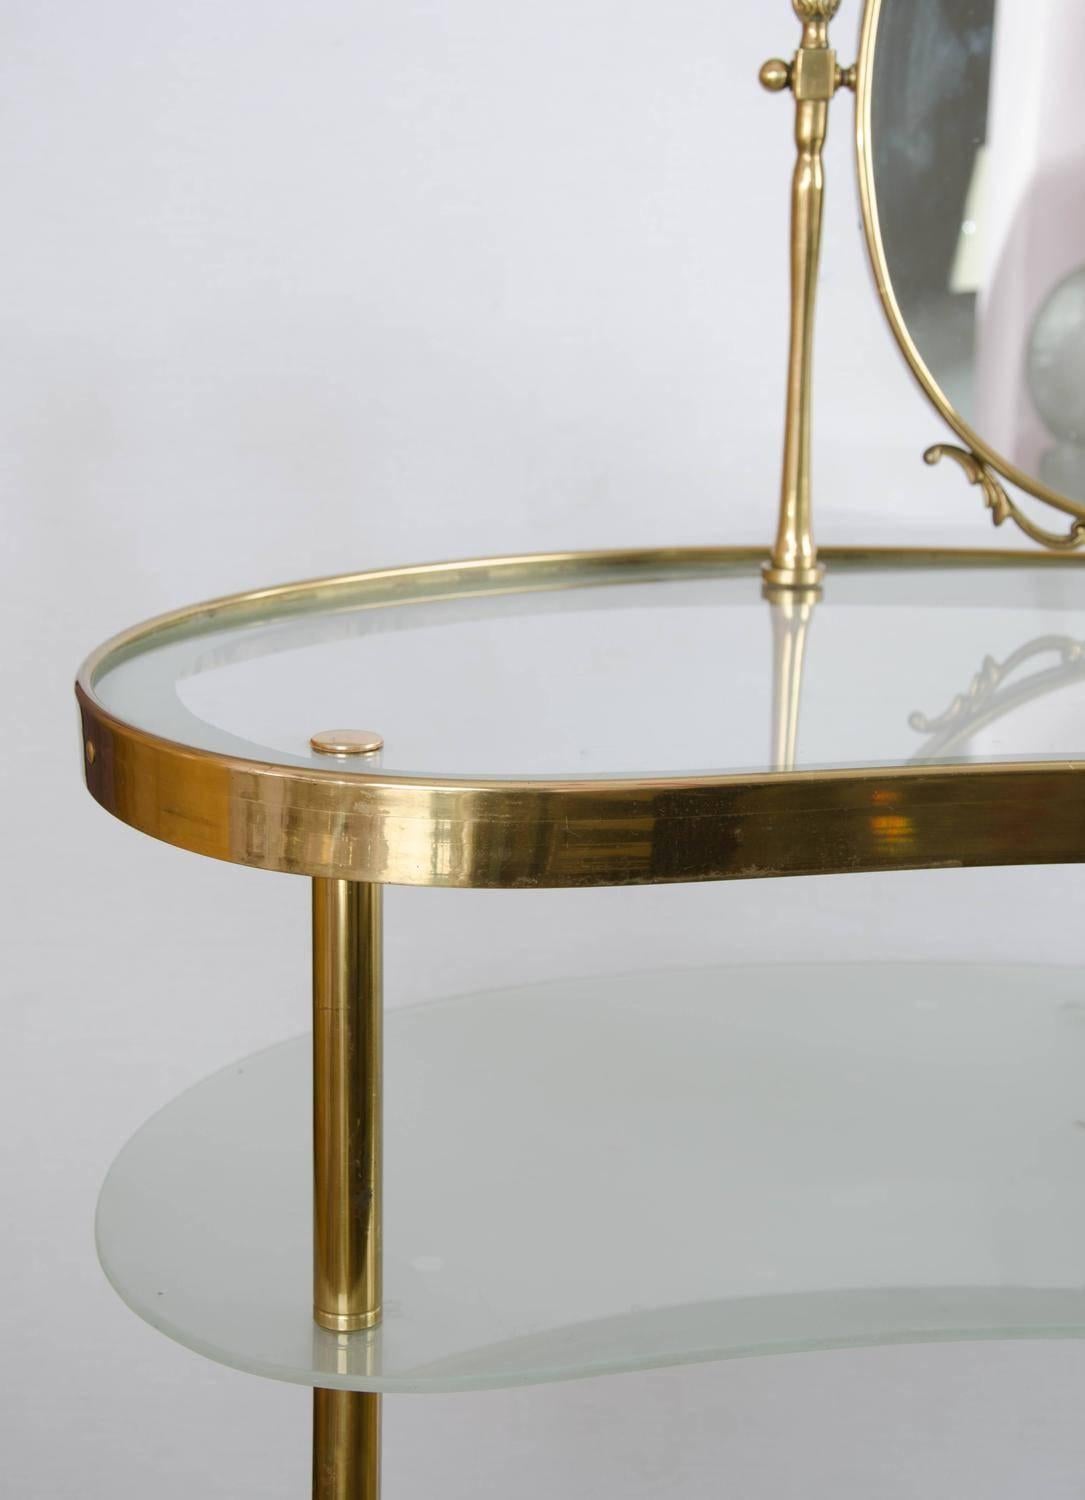 Two-tiered 1950s dressing table with integral oval mirror surrounded by decorative brass detailing. The lower shelf of etched glass with polka dot patterning has a fitted light to add a touch of glamour.